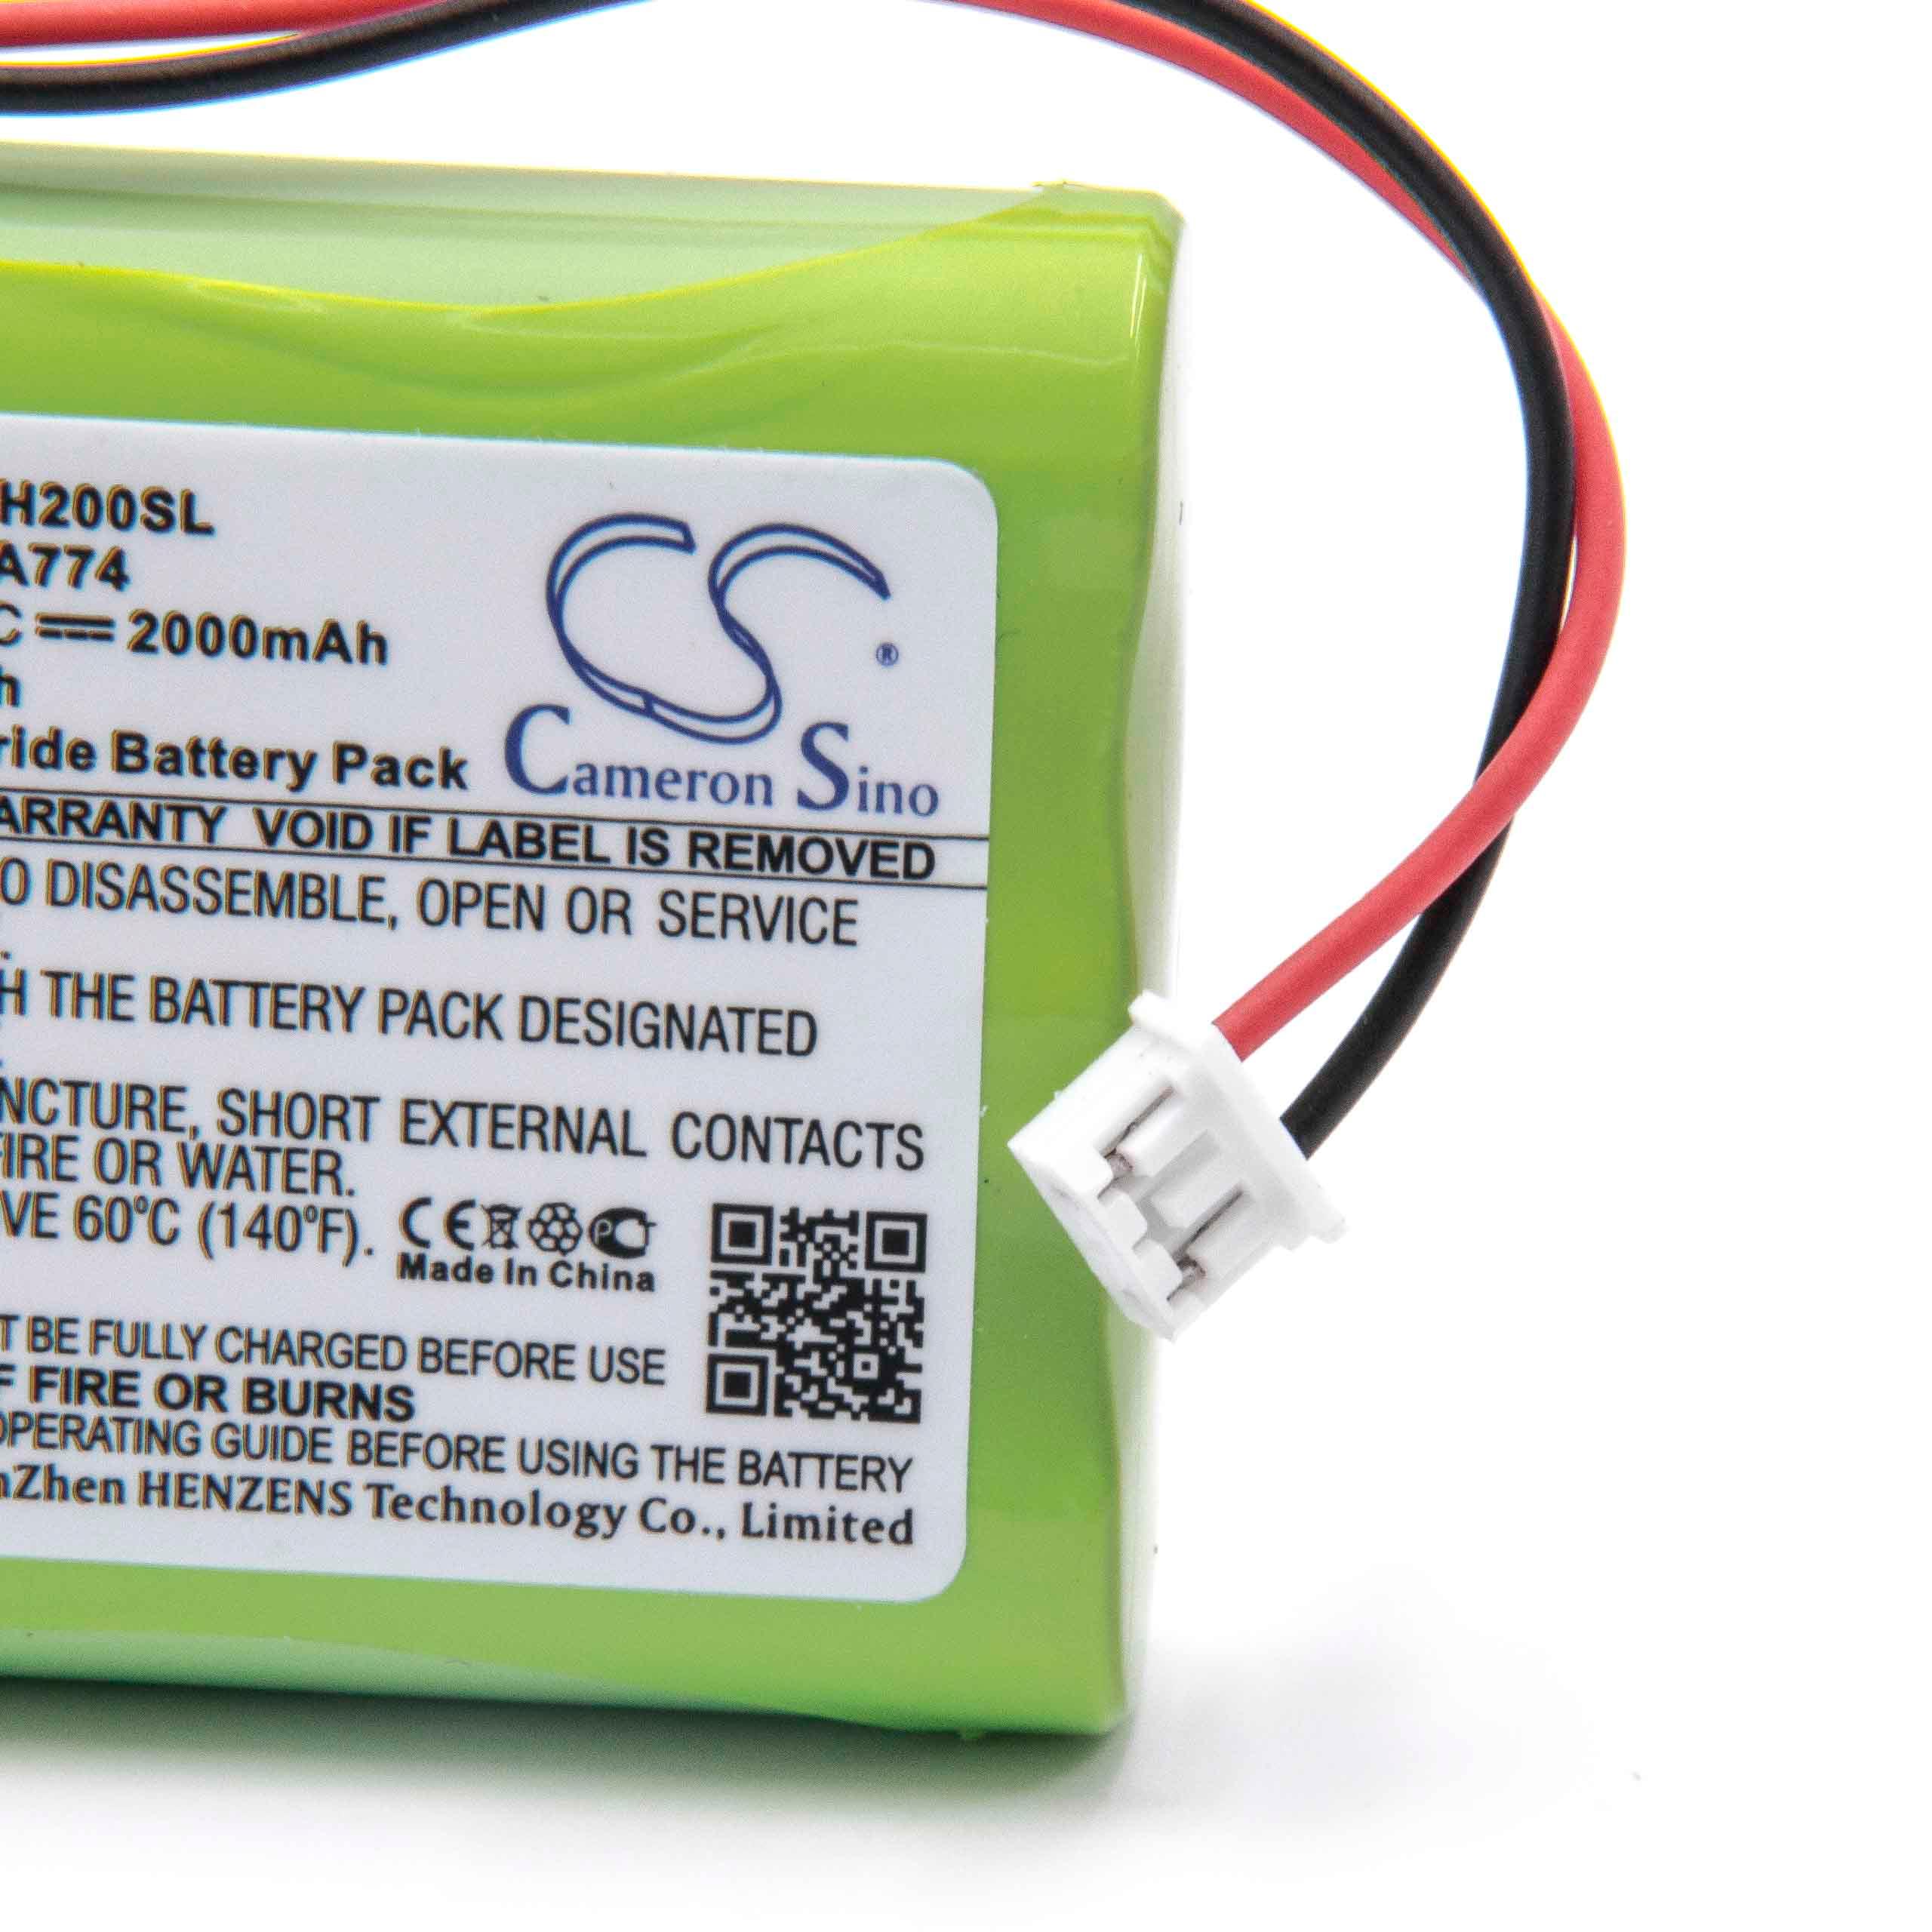 Laser Battery Replacement for TPI A007, A774, 160AAH3BML - 2000mAh 3.6V NiMH